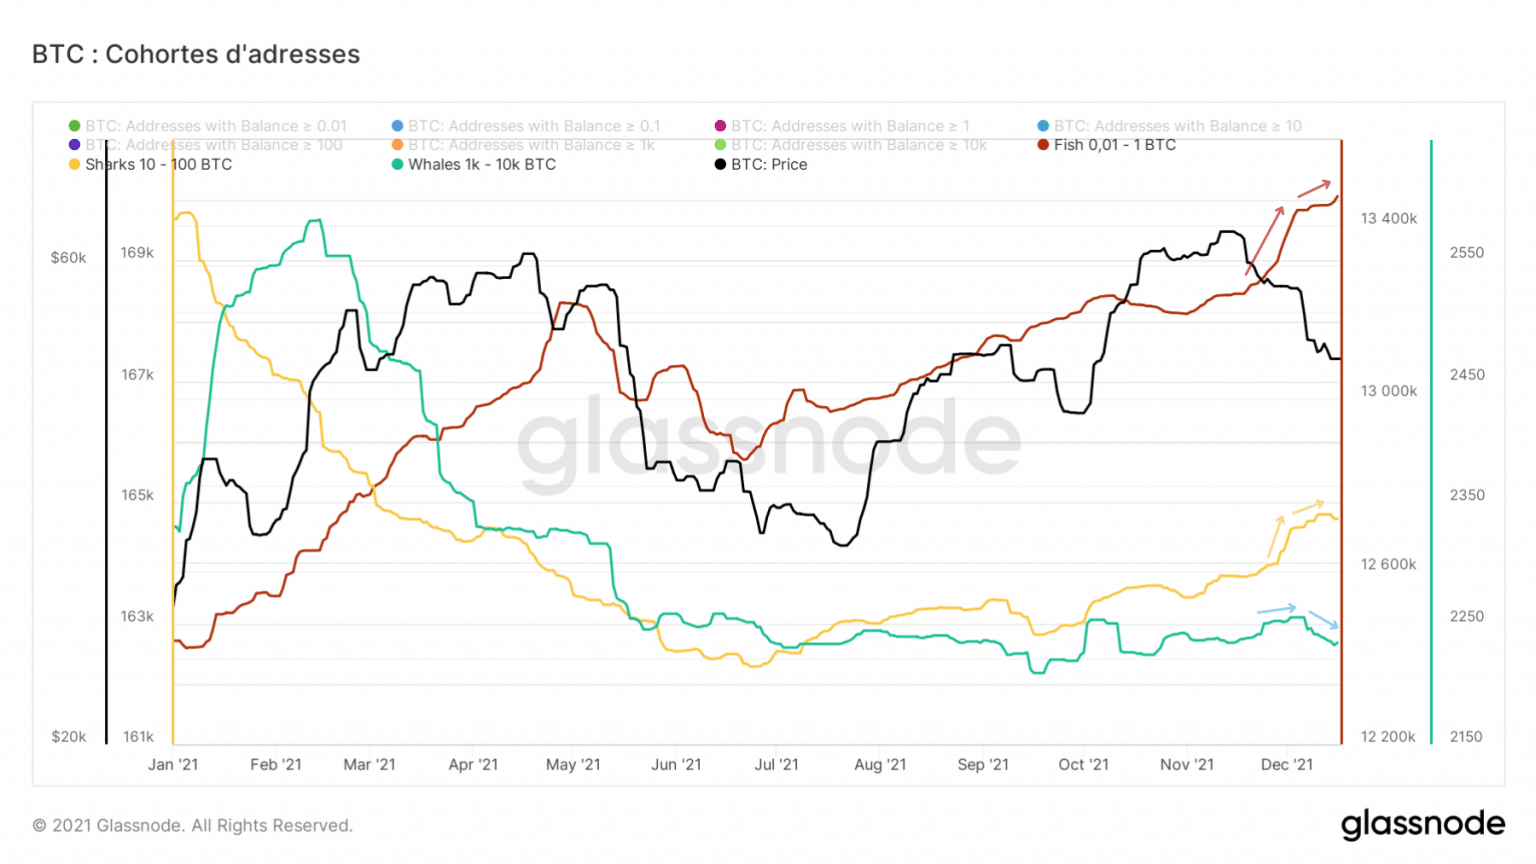 Graph of BTC held by bitcoin address groups (Source: Glassnode)